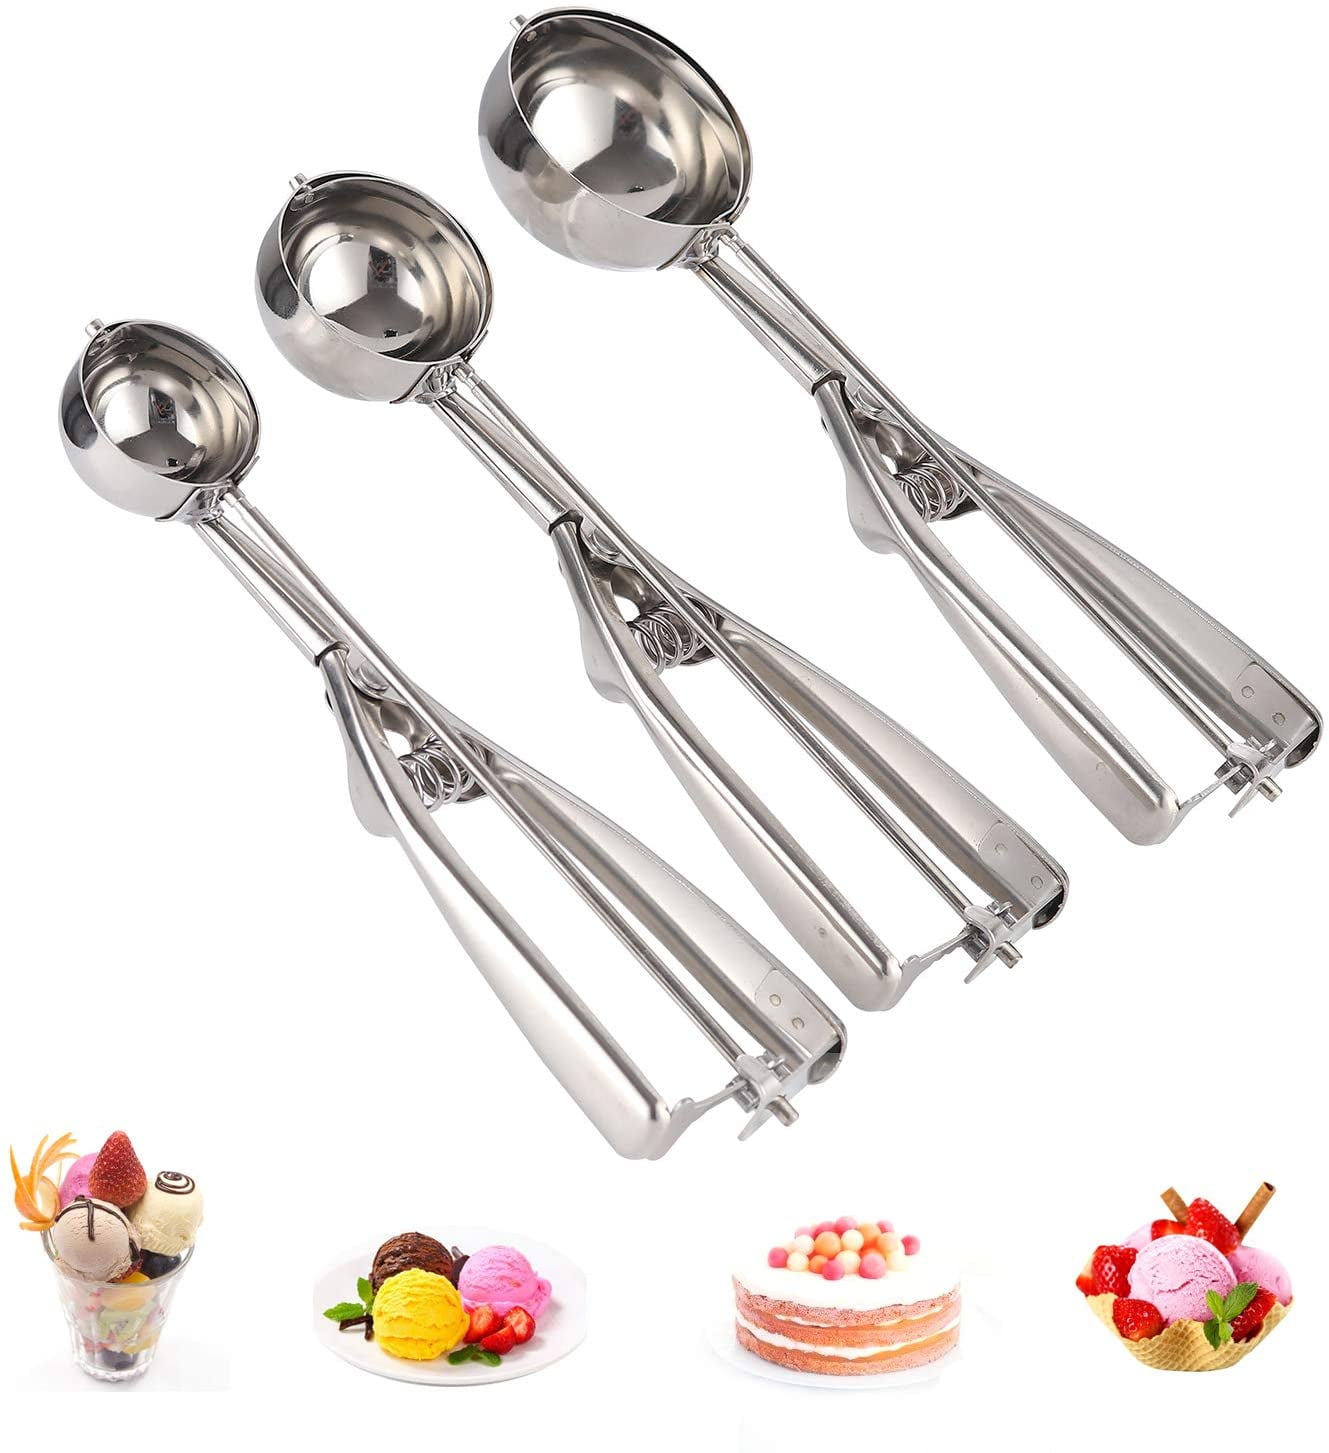 Cookie Scoop Set, Stainless Steel Ice Cream Scoops with Trigger Release,  Include Large-Medium-Small Sizes Balls for Perfect for Cookie, Ice Cream,  Cupcake, Muffin, Meatball 